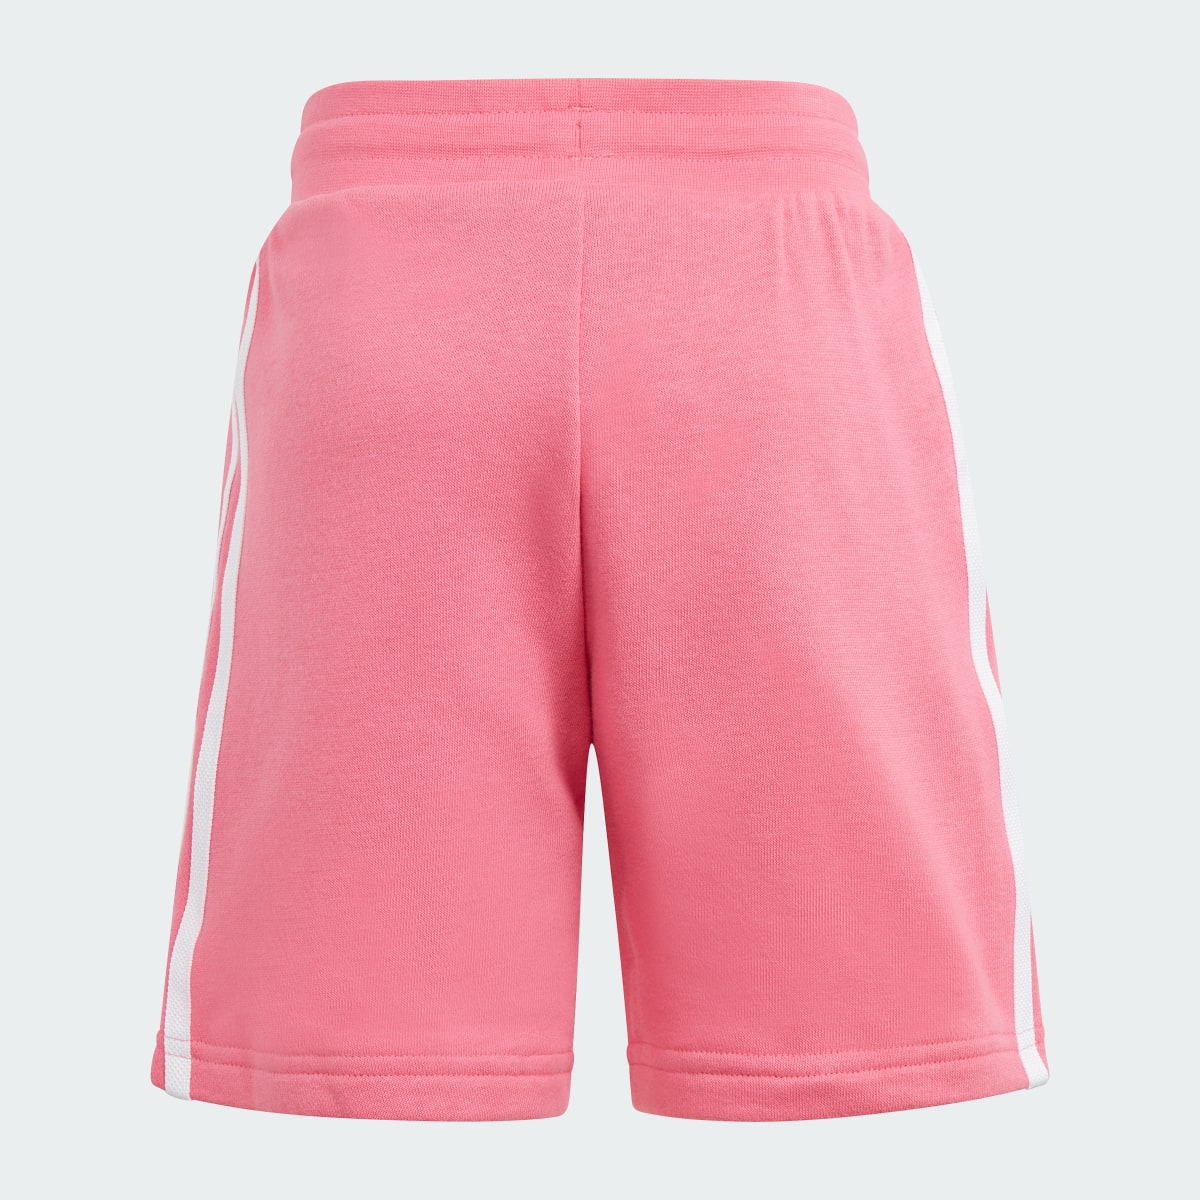 Adidas Completo adicolor Shorts and Tee. 6